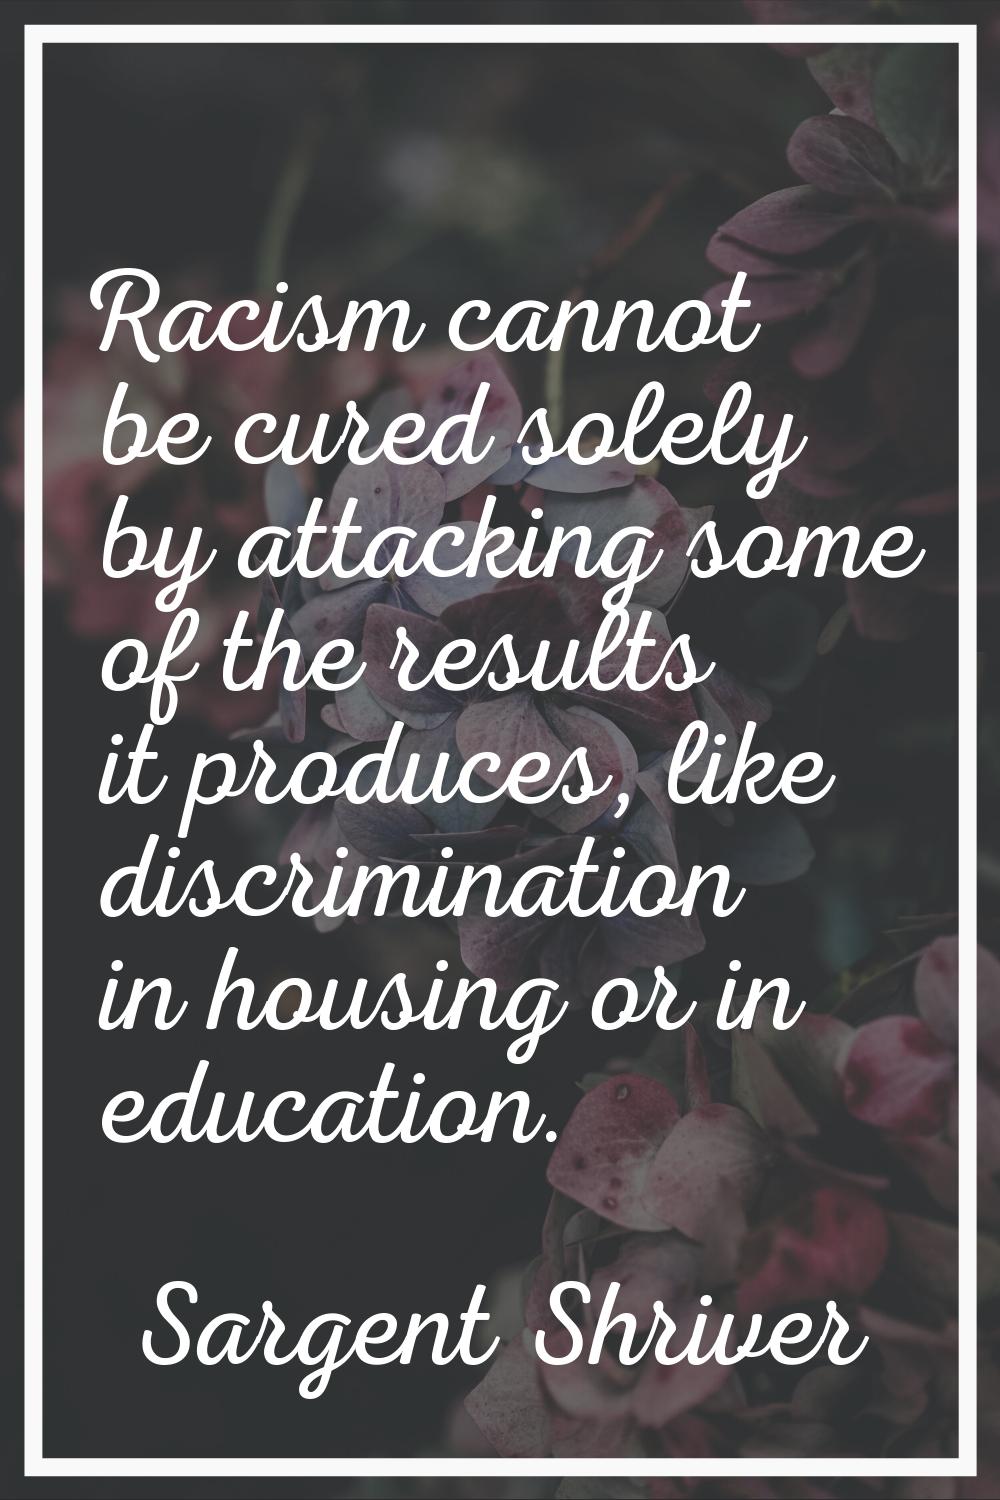 Racism cannot be cured solely by attacking some of the results it produces, like discrimination in 